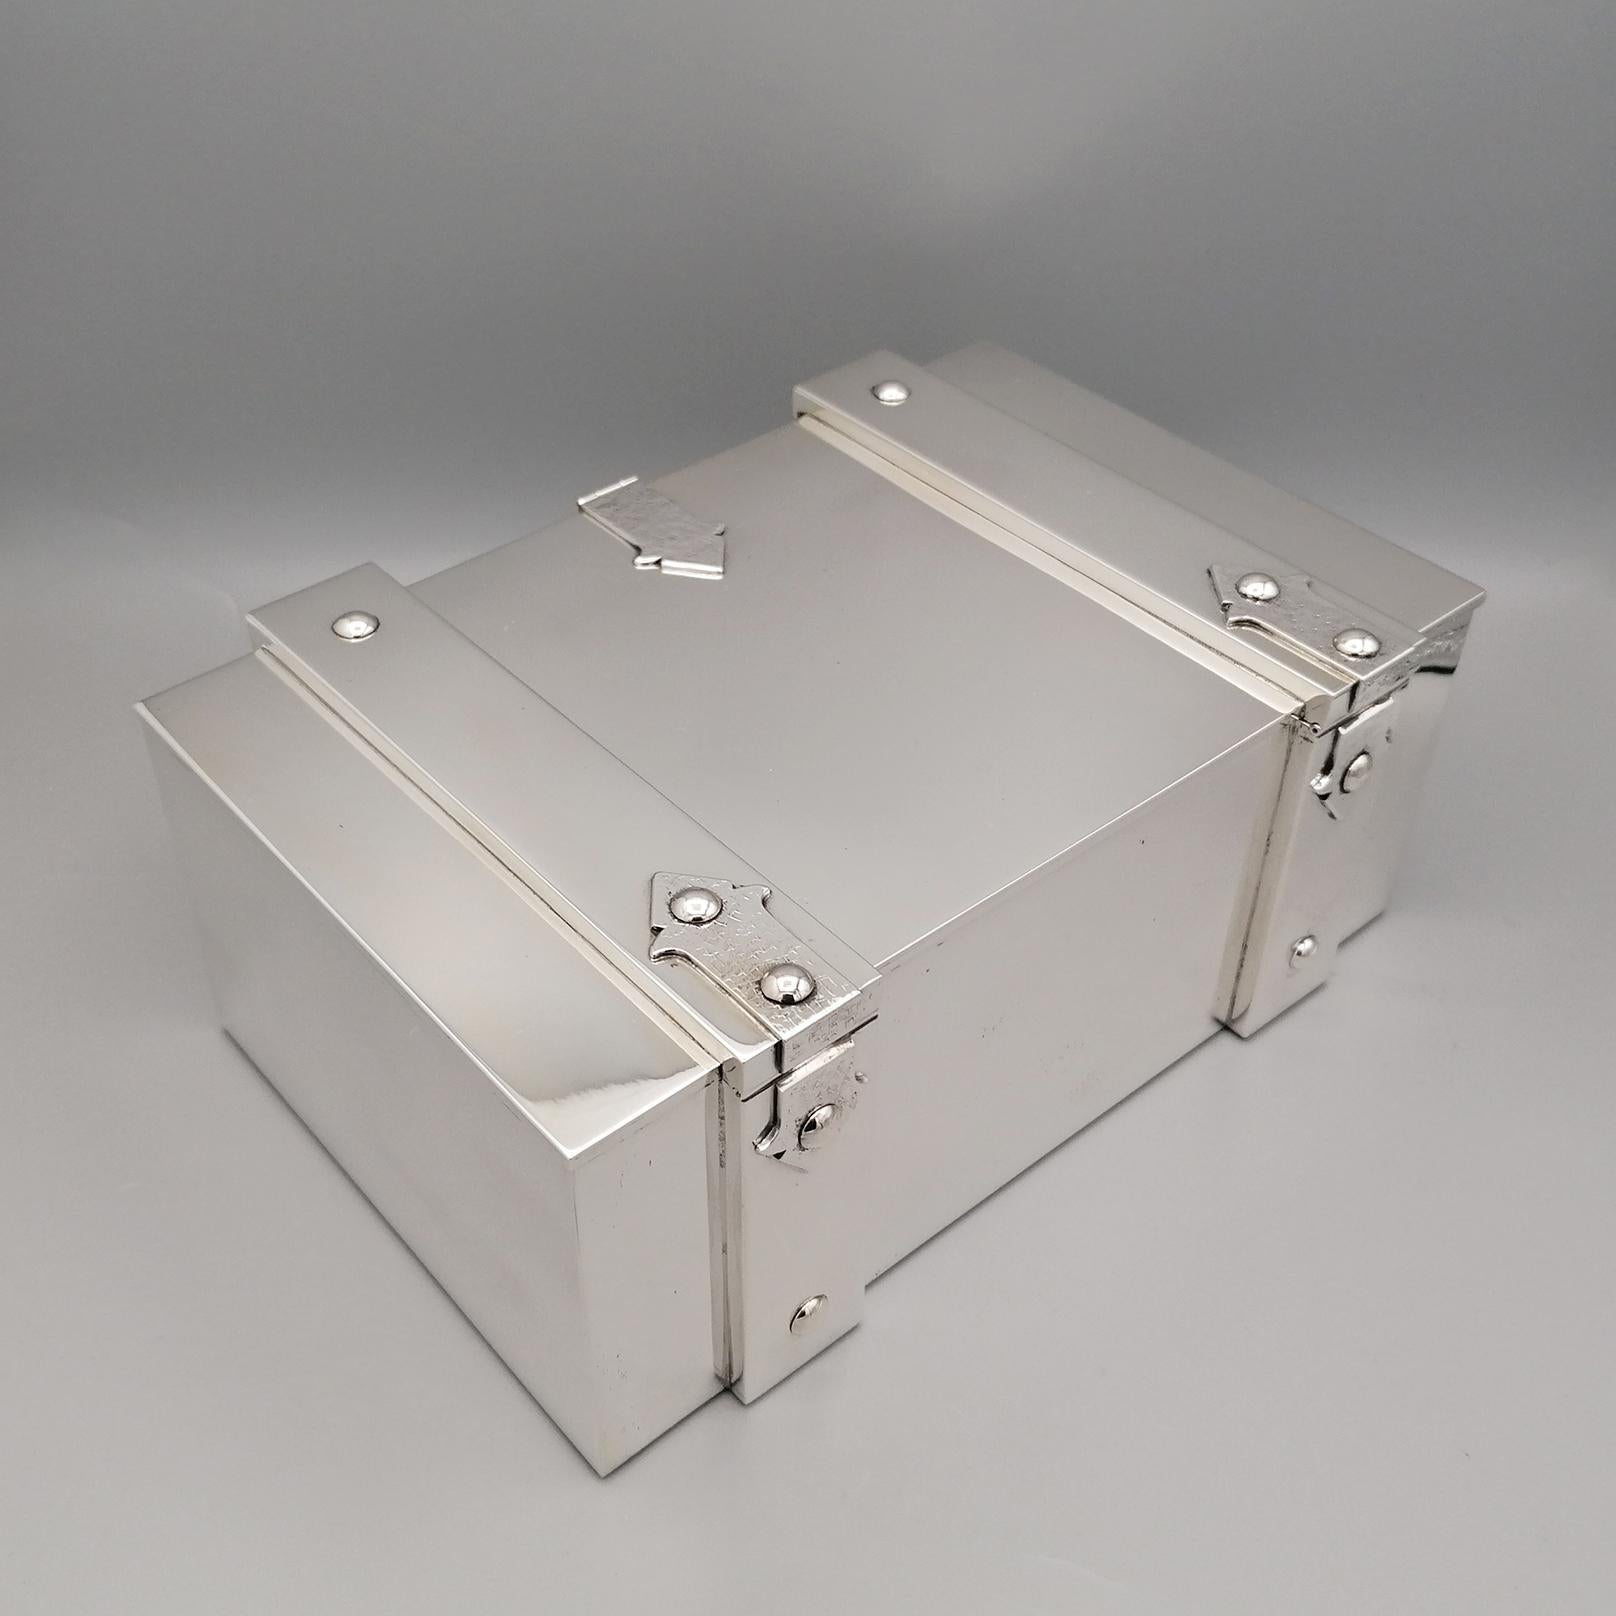 Hand-Crafted 20th Century Italian Sterling Silver Jewelry Casket Box with Hinged Closure